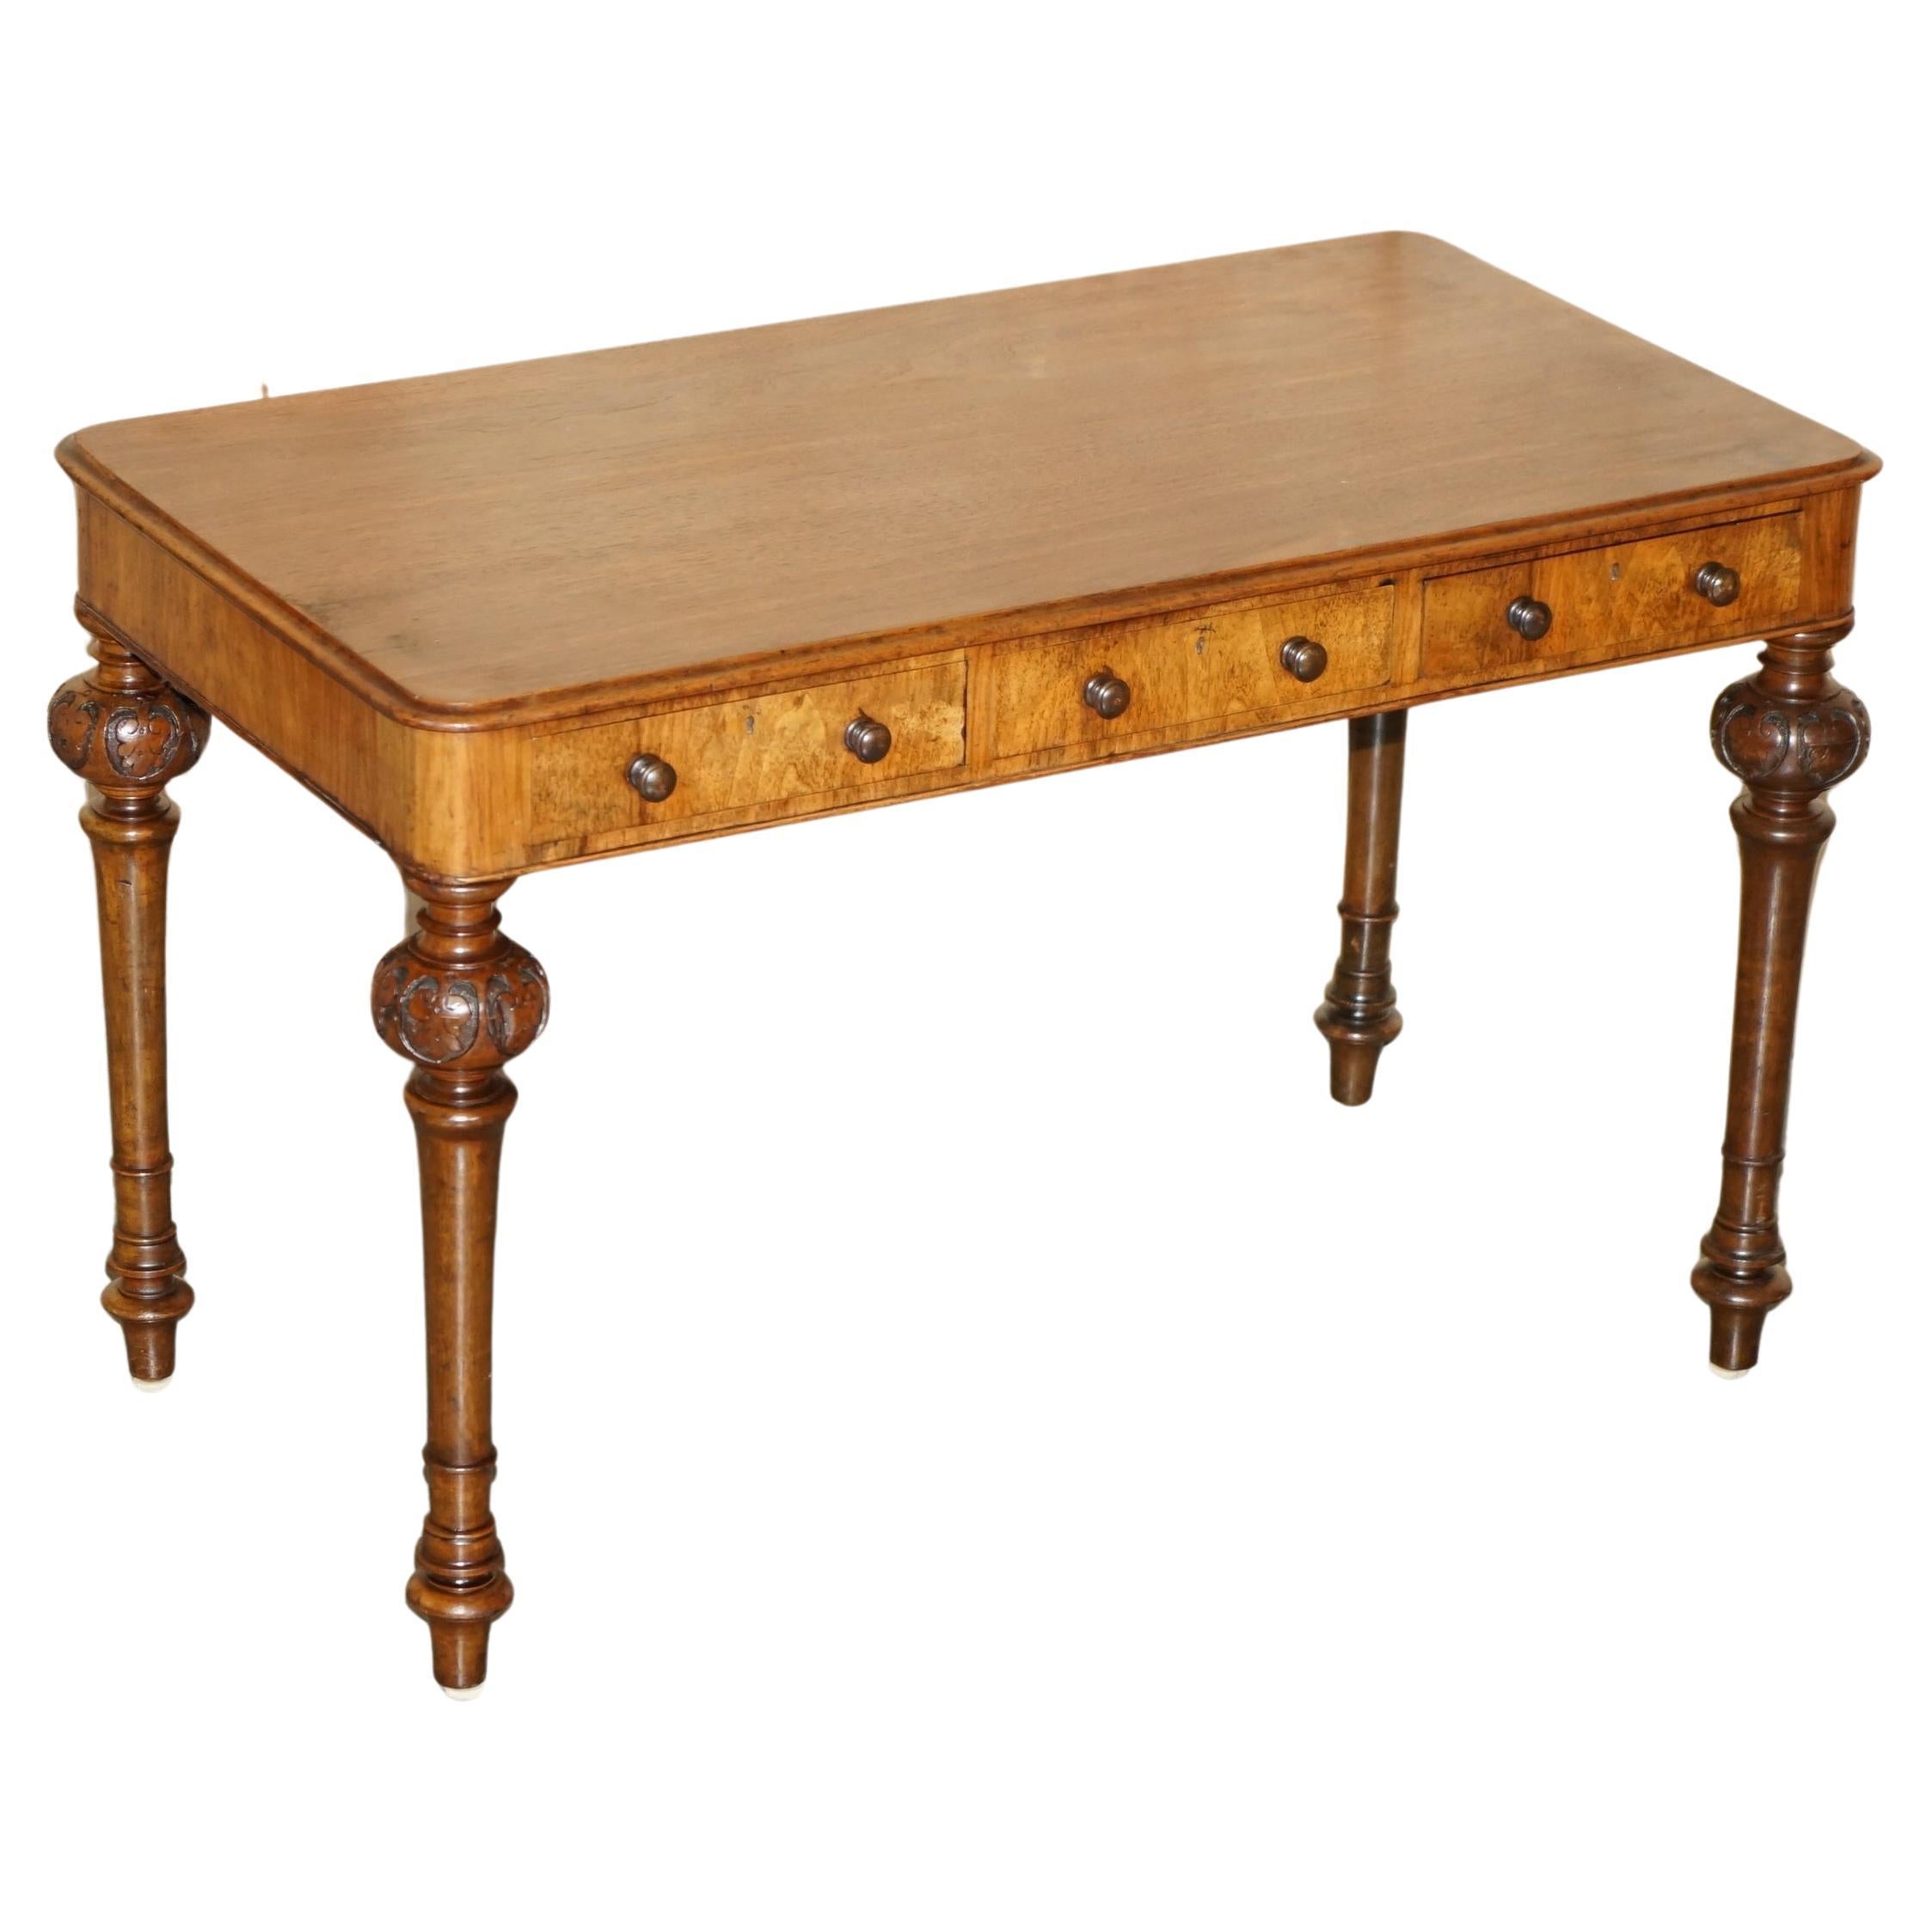 EXQUISITE SMALL WILLIAM IV CIRCA 1830 HARDWOOD WRiTING TABLE DESK CARVED LEGS